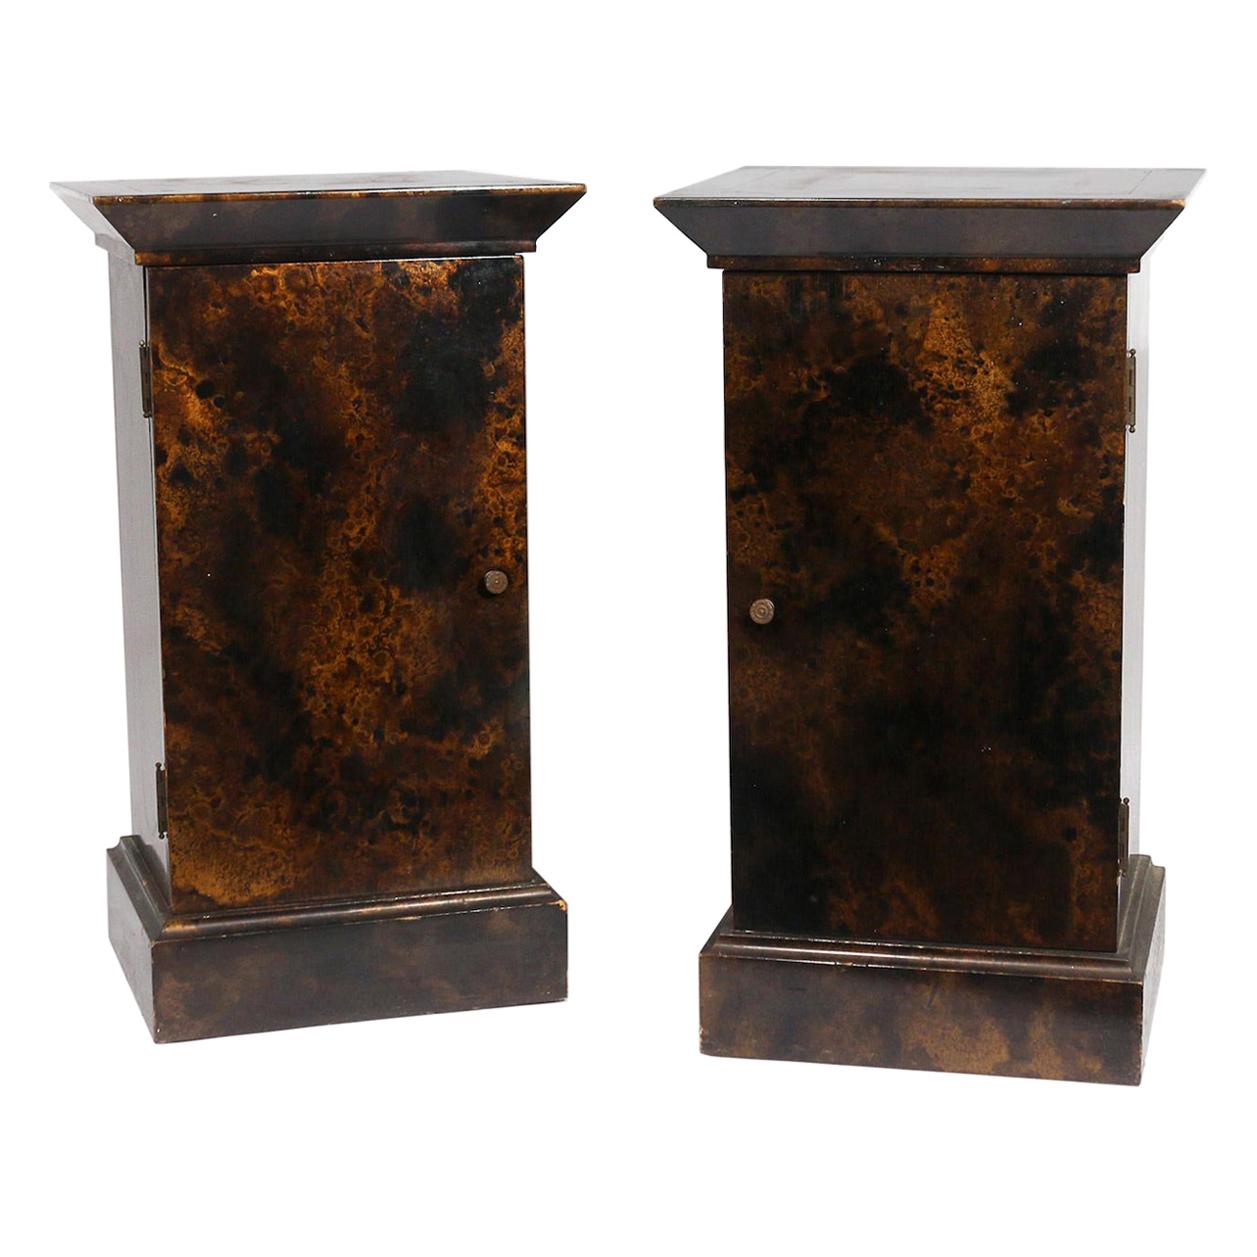 20th Century American Pair of Lacquered Burlwood Cabinets